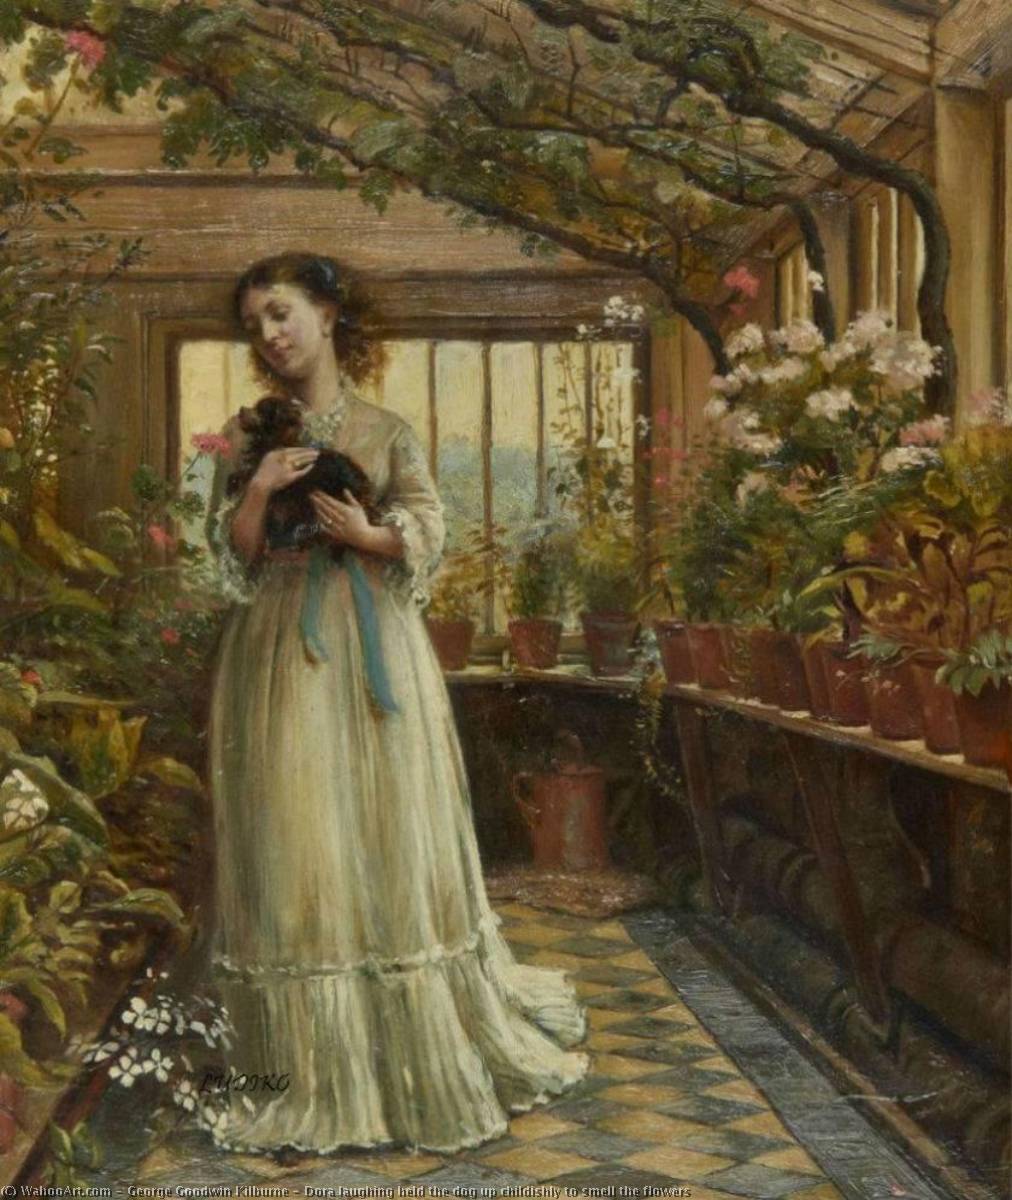 WikiOO.org - Encyclopedia of Fine Arts - Maleri, Artwork George Goodwin Kilburne - Dora laughing held the dog up childishly to smell the flowers